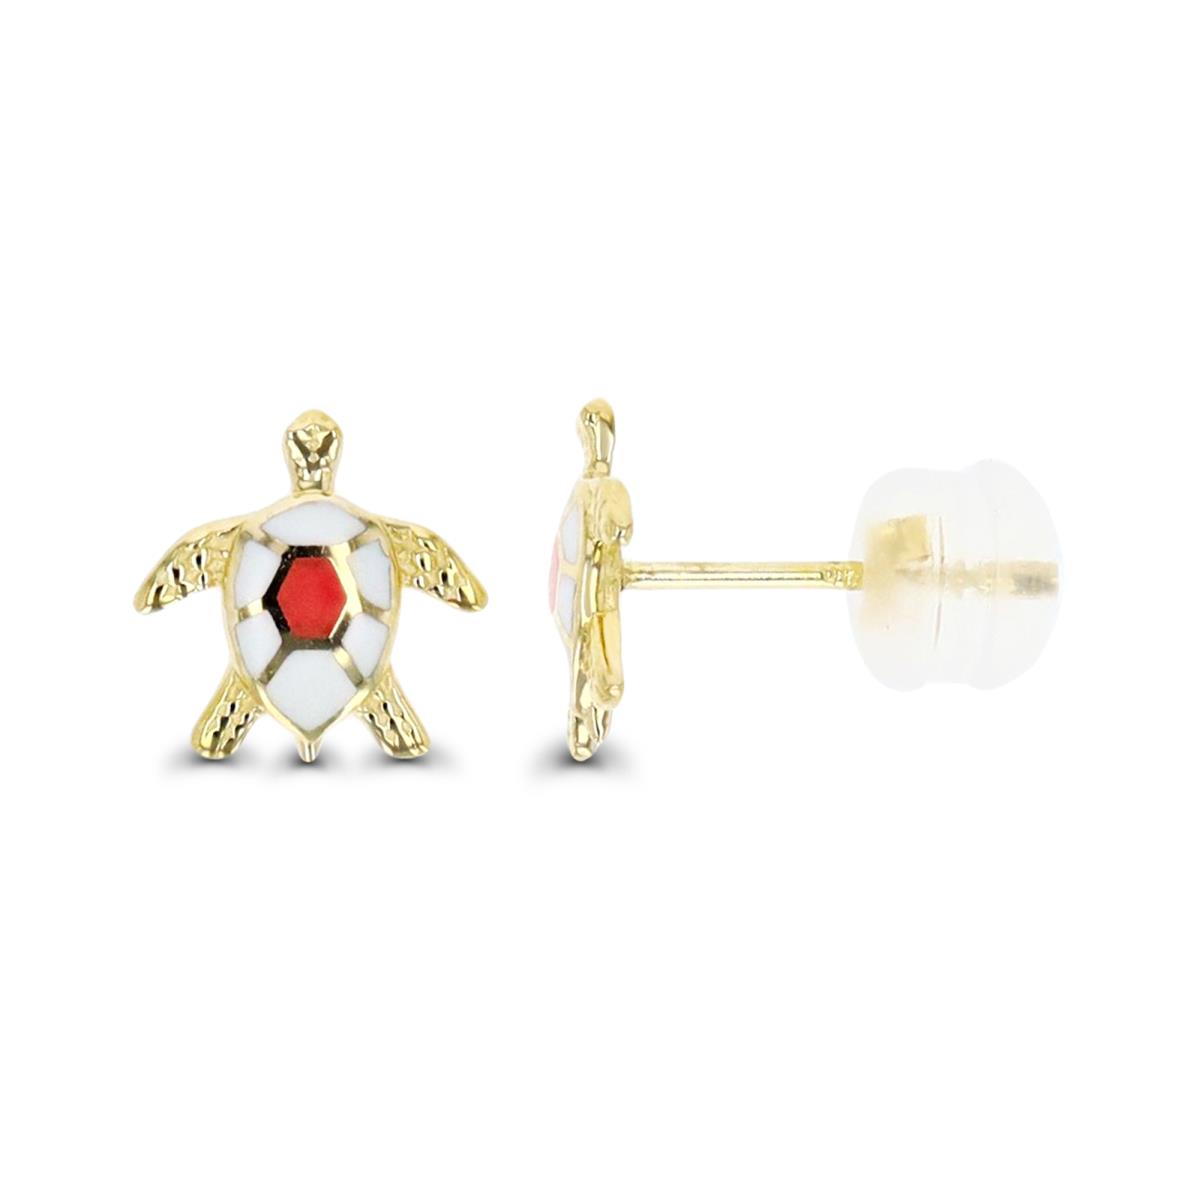 10K Yellow Gold & Pink and White Enamel Turtle Stud Earring